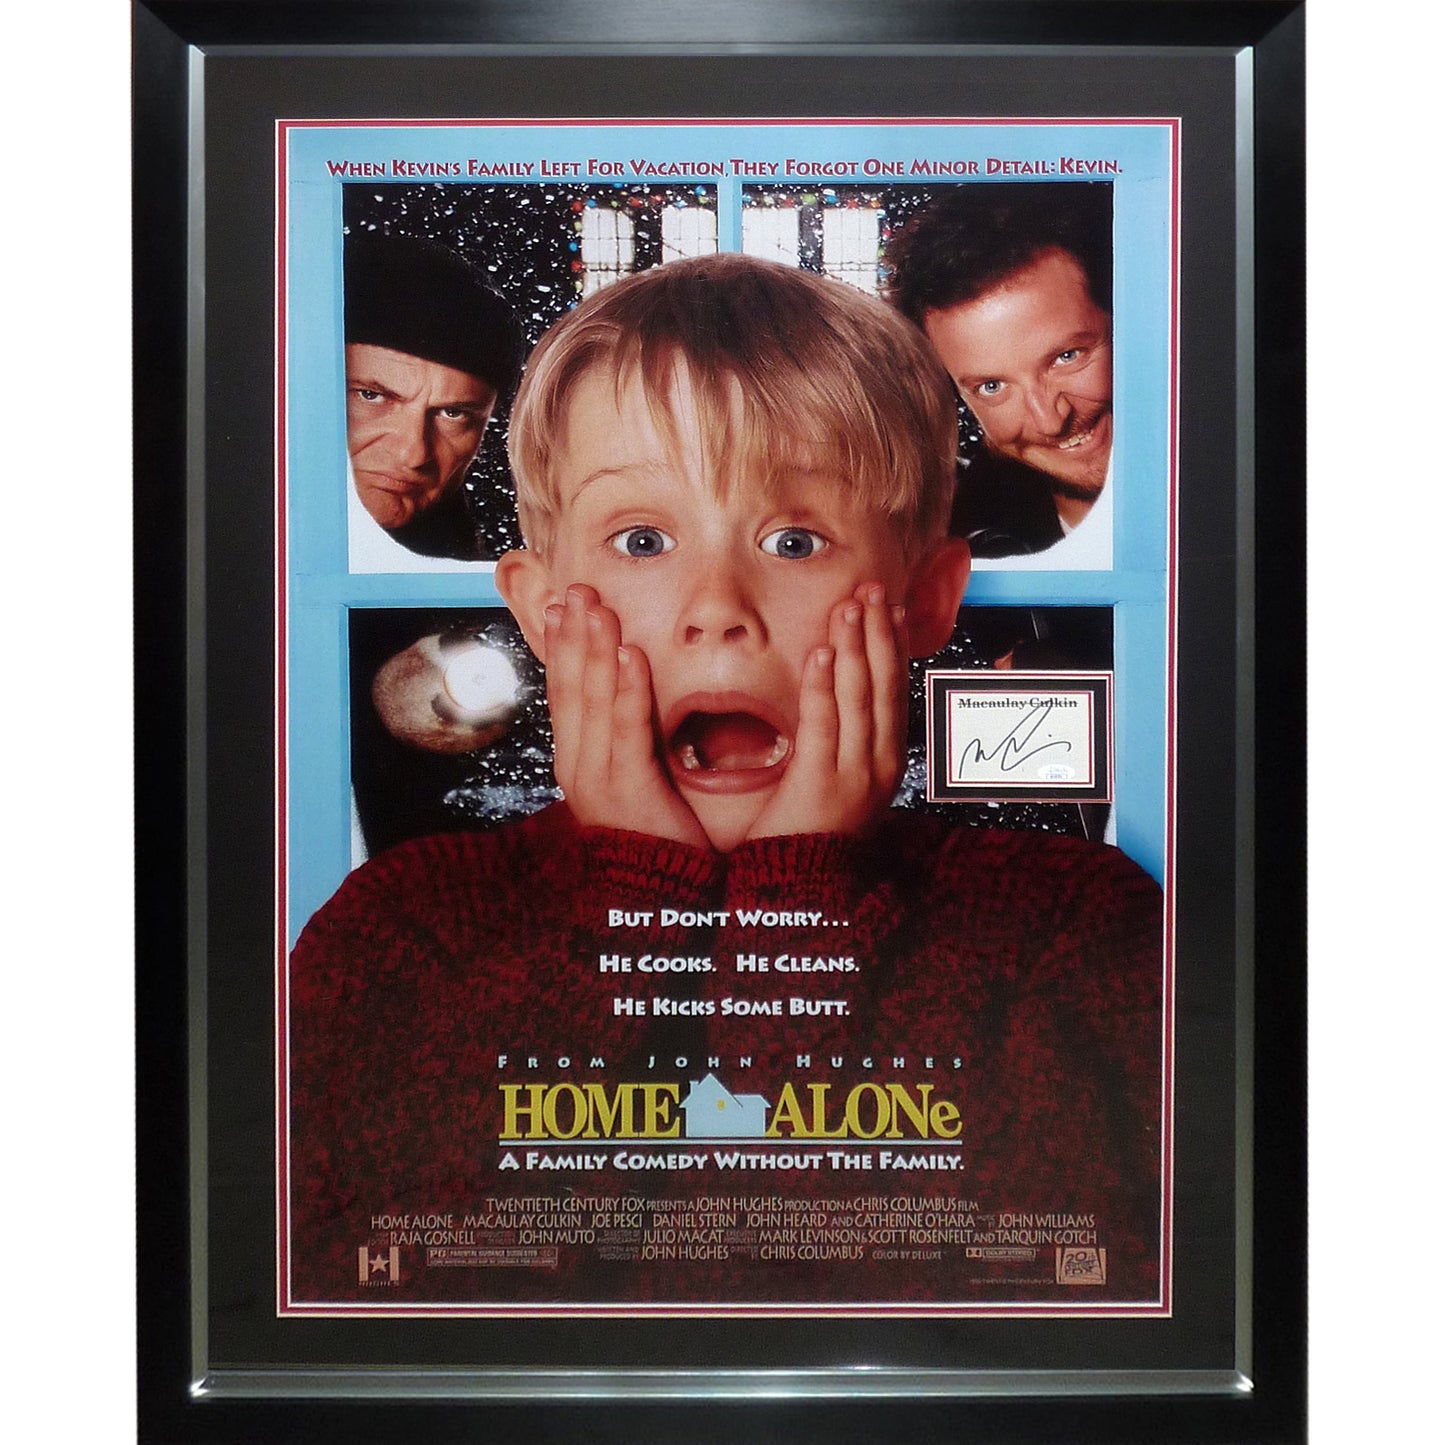 Home Alone Full-Size Movie Poster Deluxe Framed with Macaulay Culkin Autograph - JSA